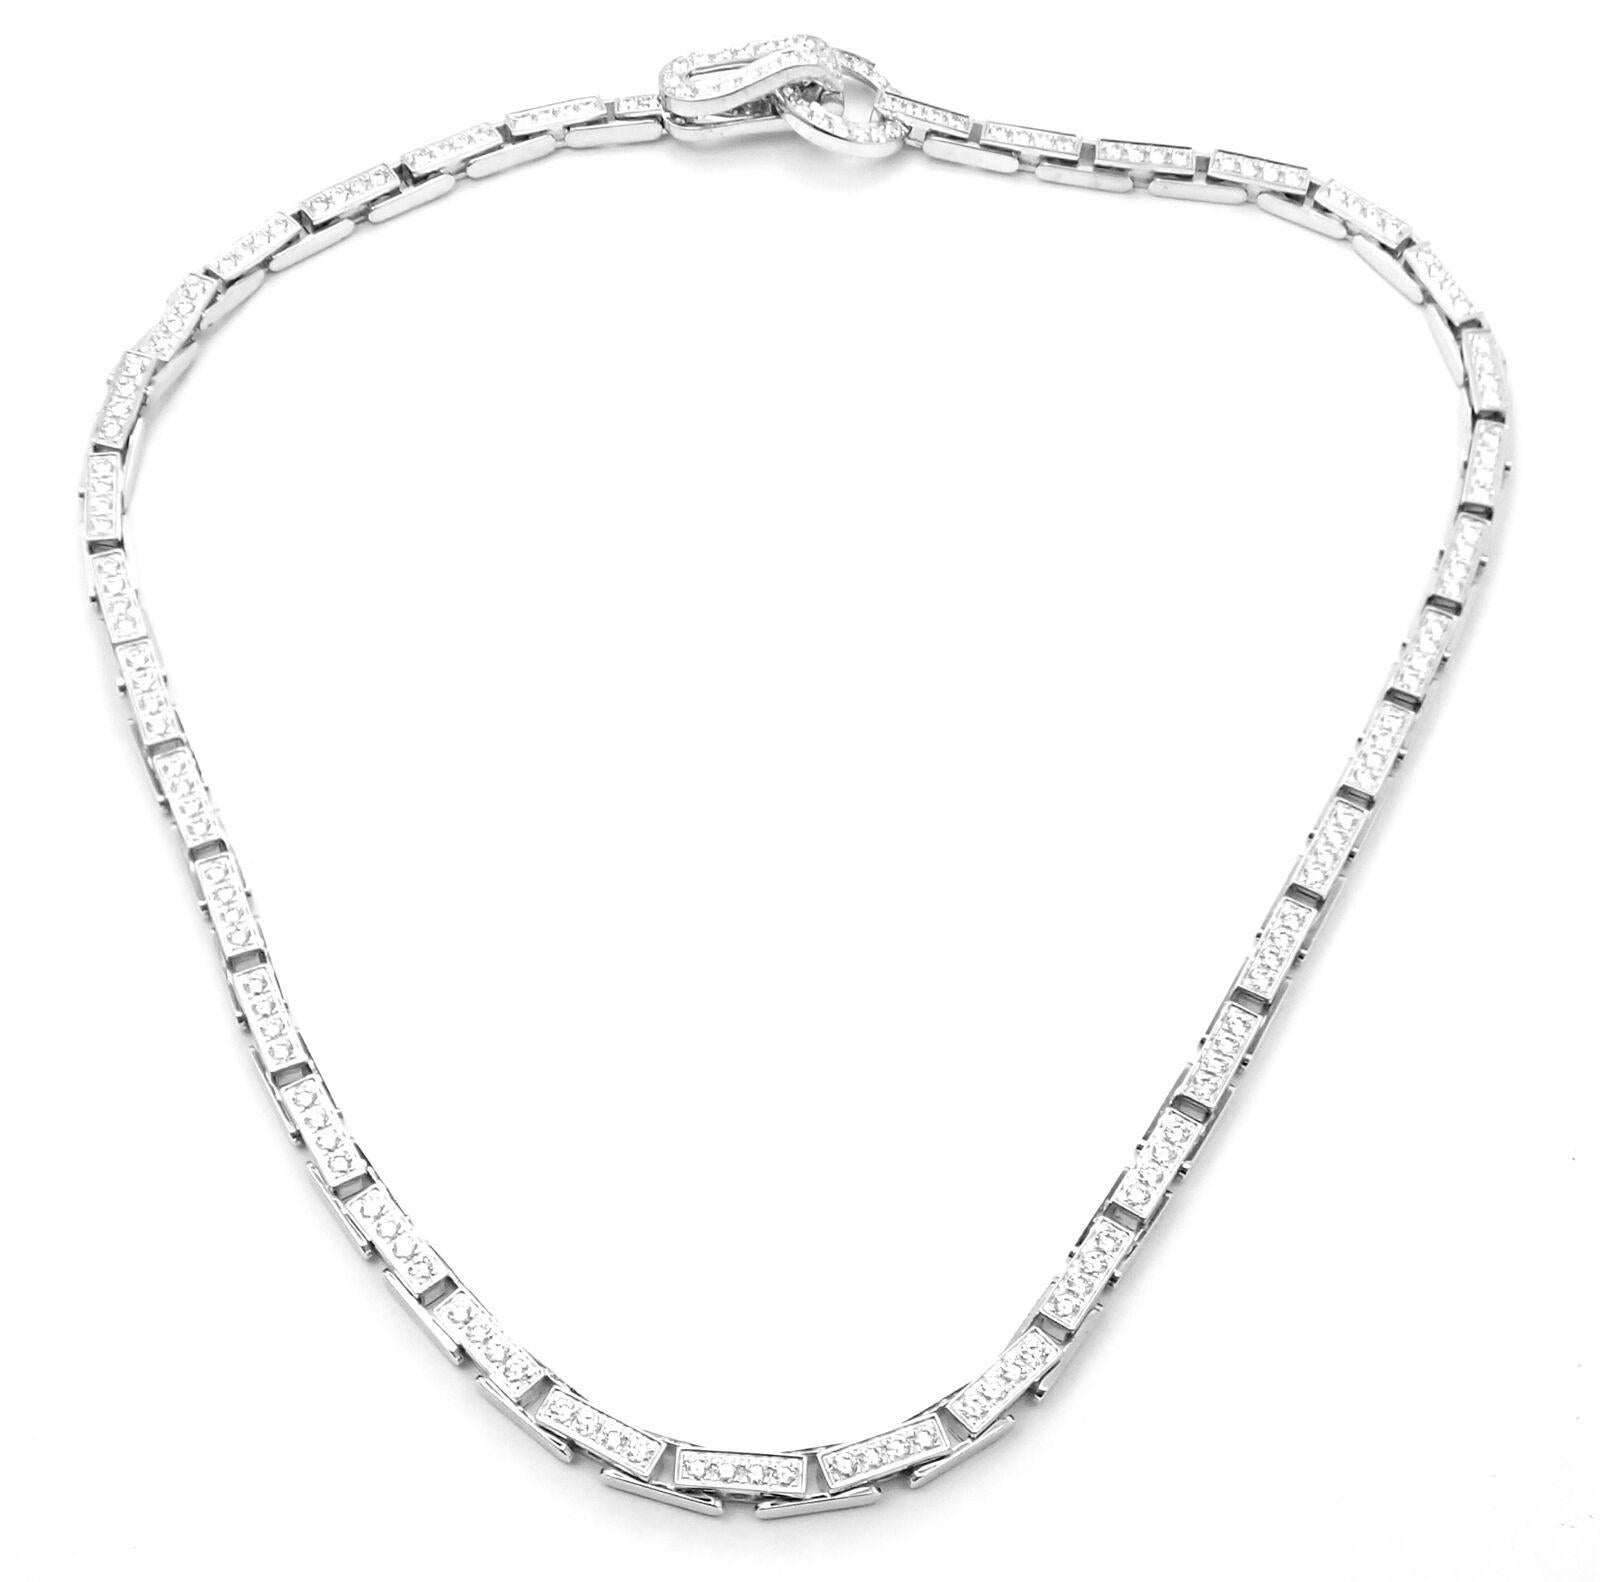 Cartier Agrafe Full Diamond Link White Gold Necklace Certificate For Sale 6